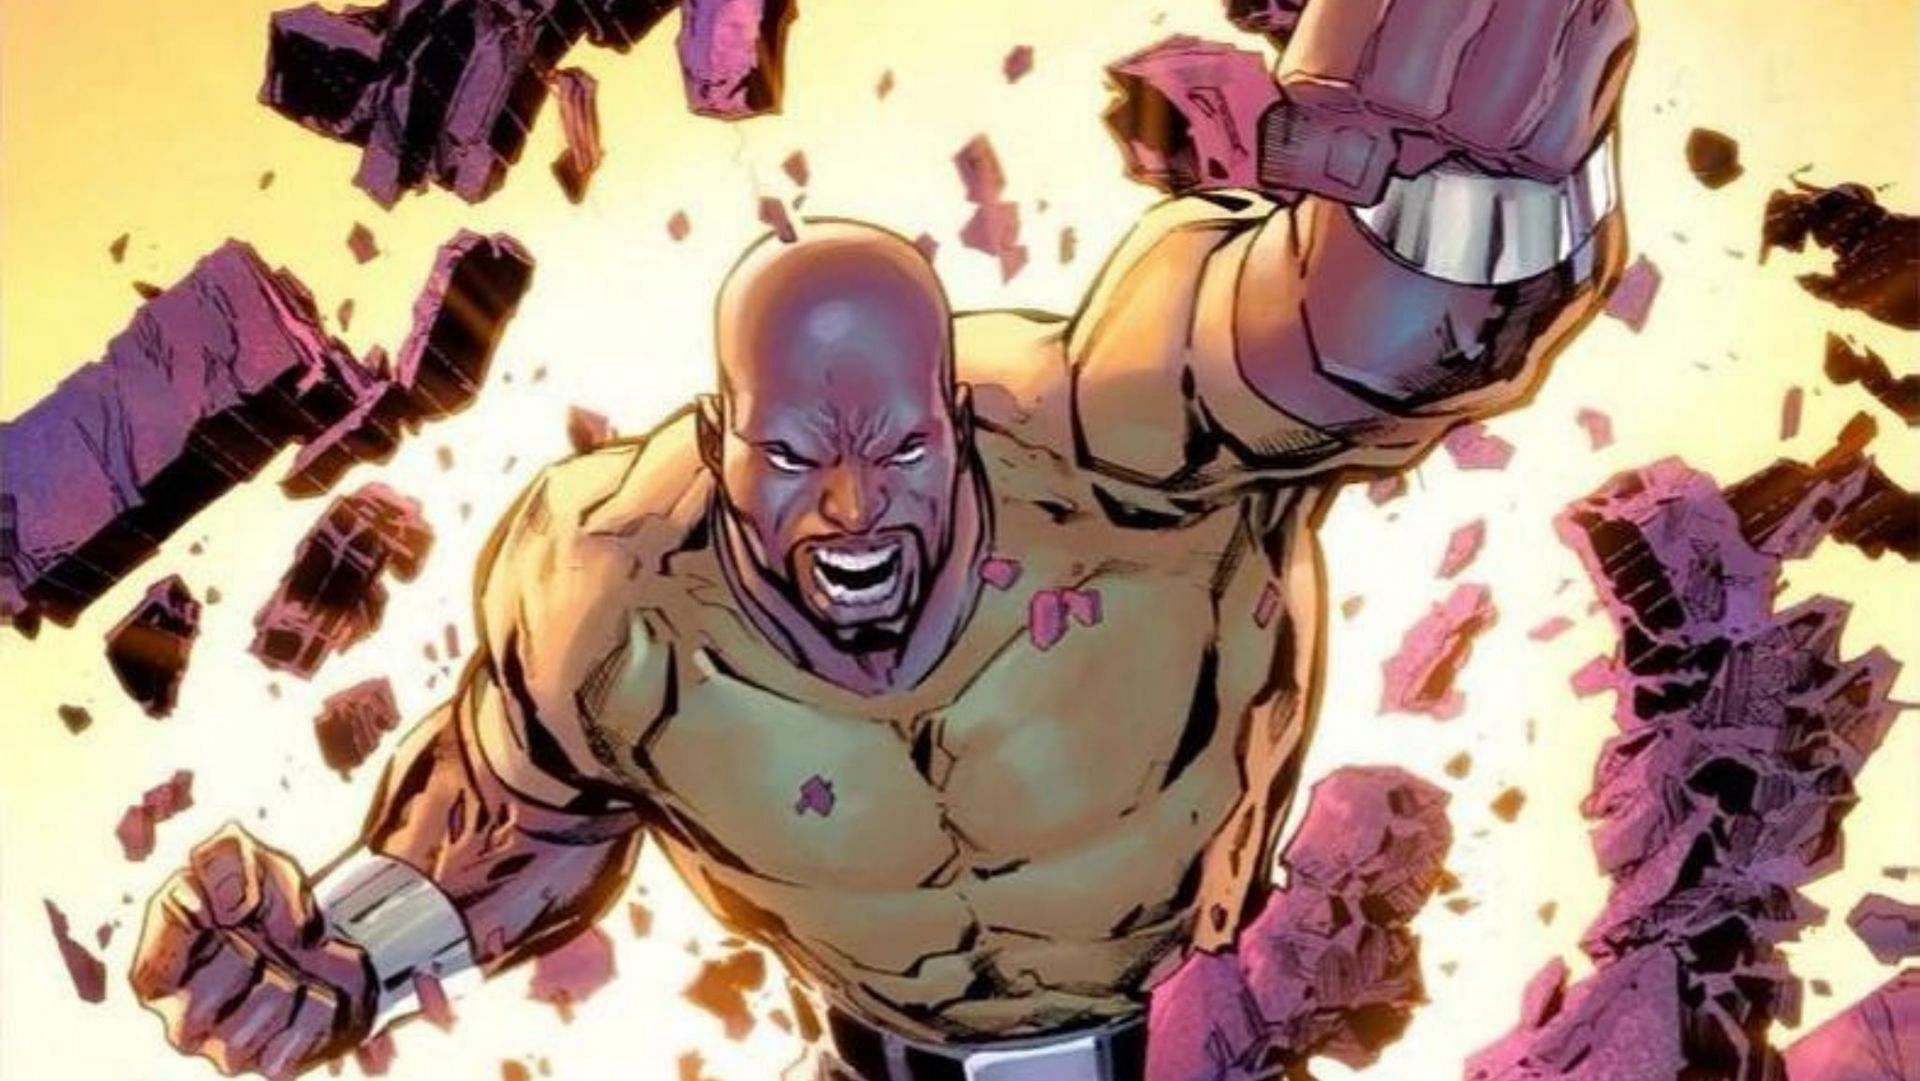 Luke Cage, the unbreakable hero, is a symbol of Black power and resilience (Image via Marvel Comics)